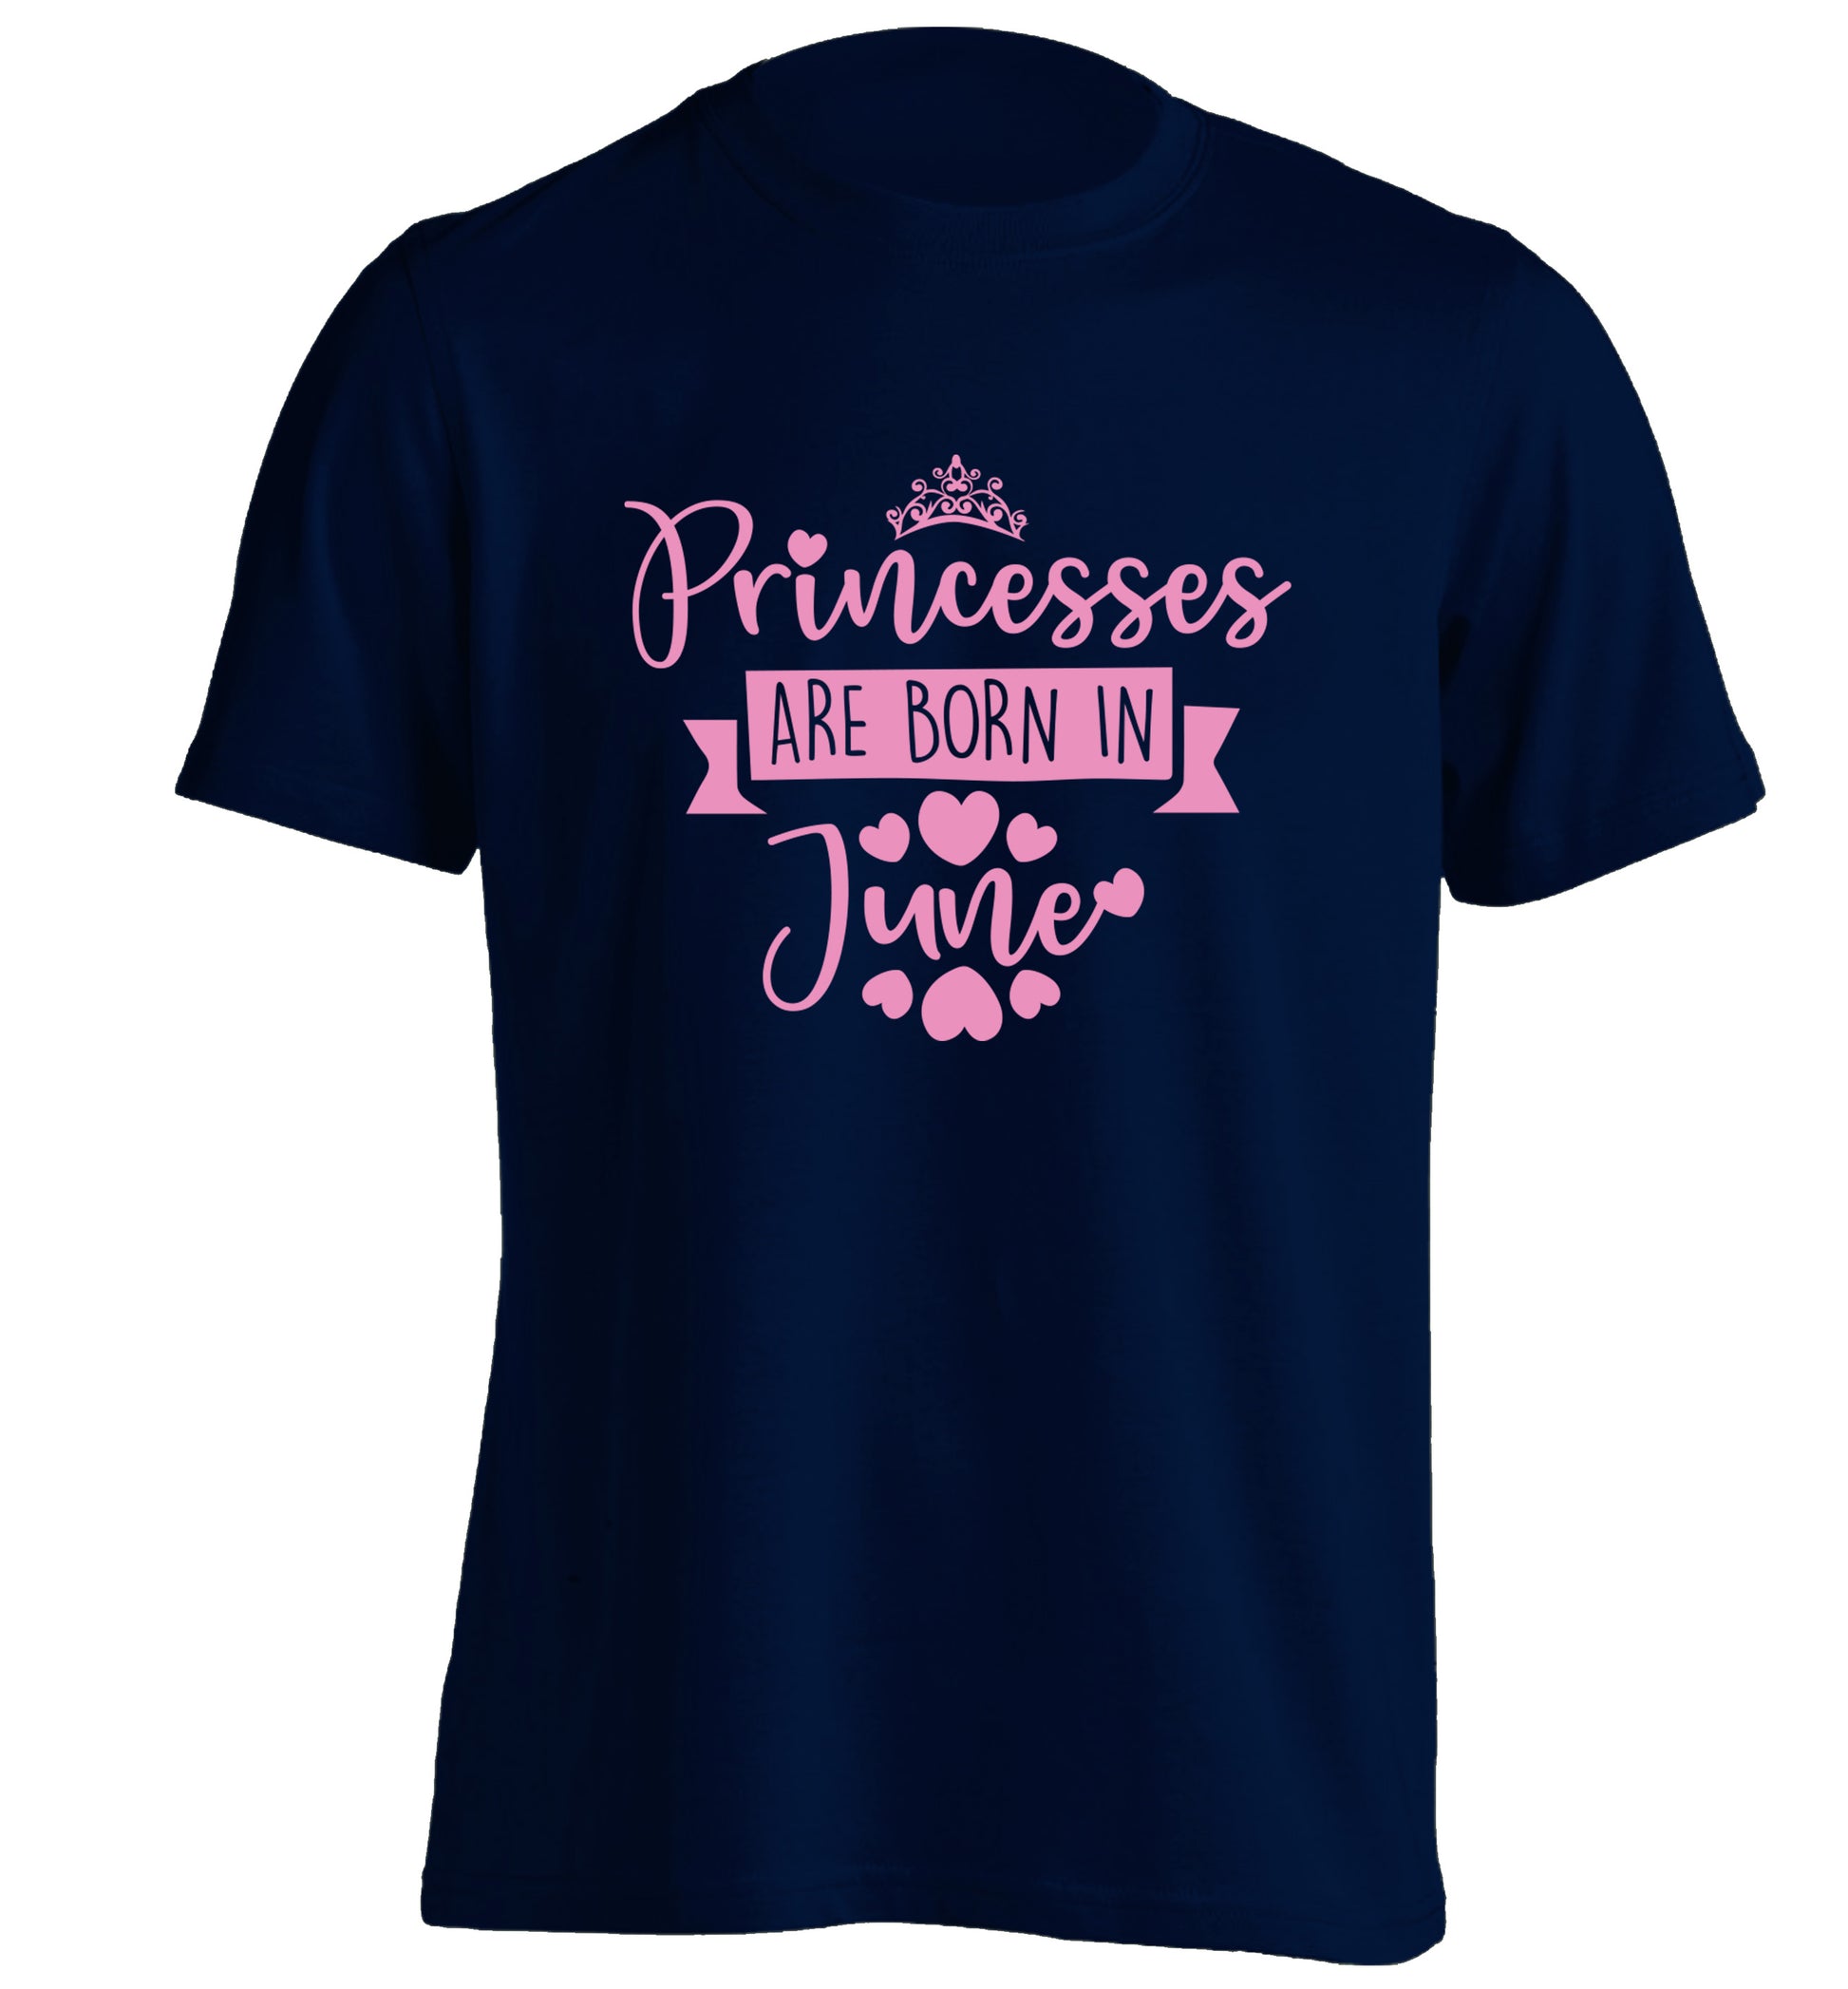 Princesses are born in June adults unisex navy Tshirt 2XL